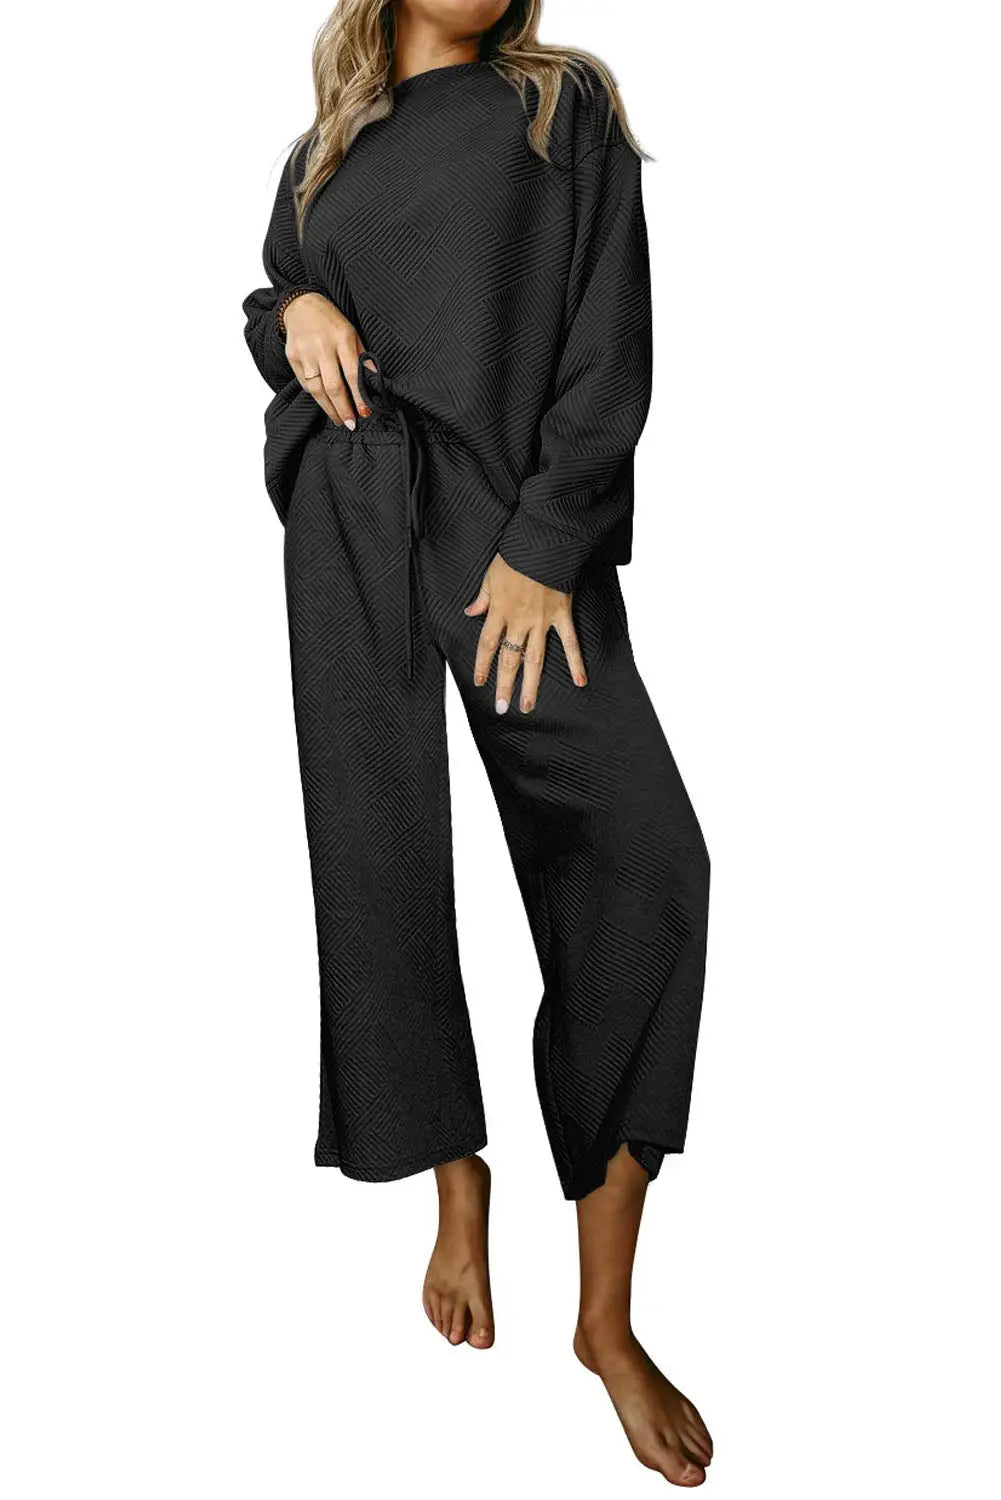 Black ultra loose textured 2pcs slouchy outfit - loungewear